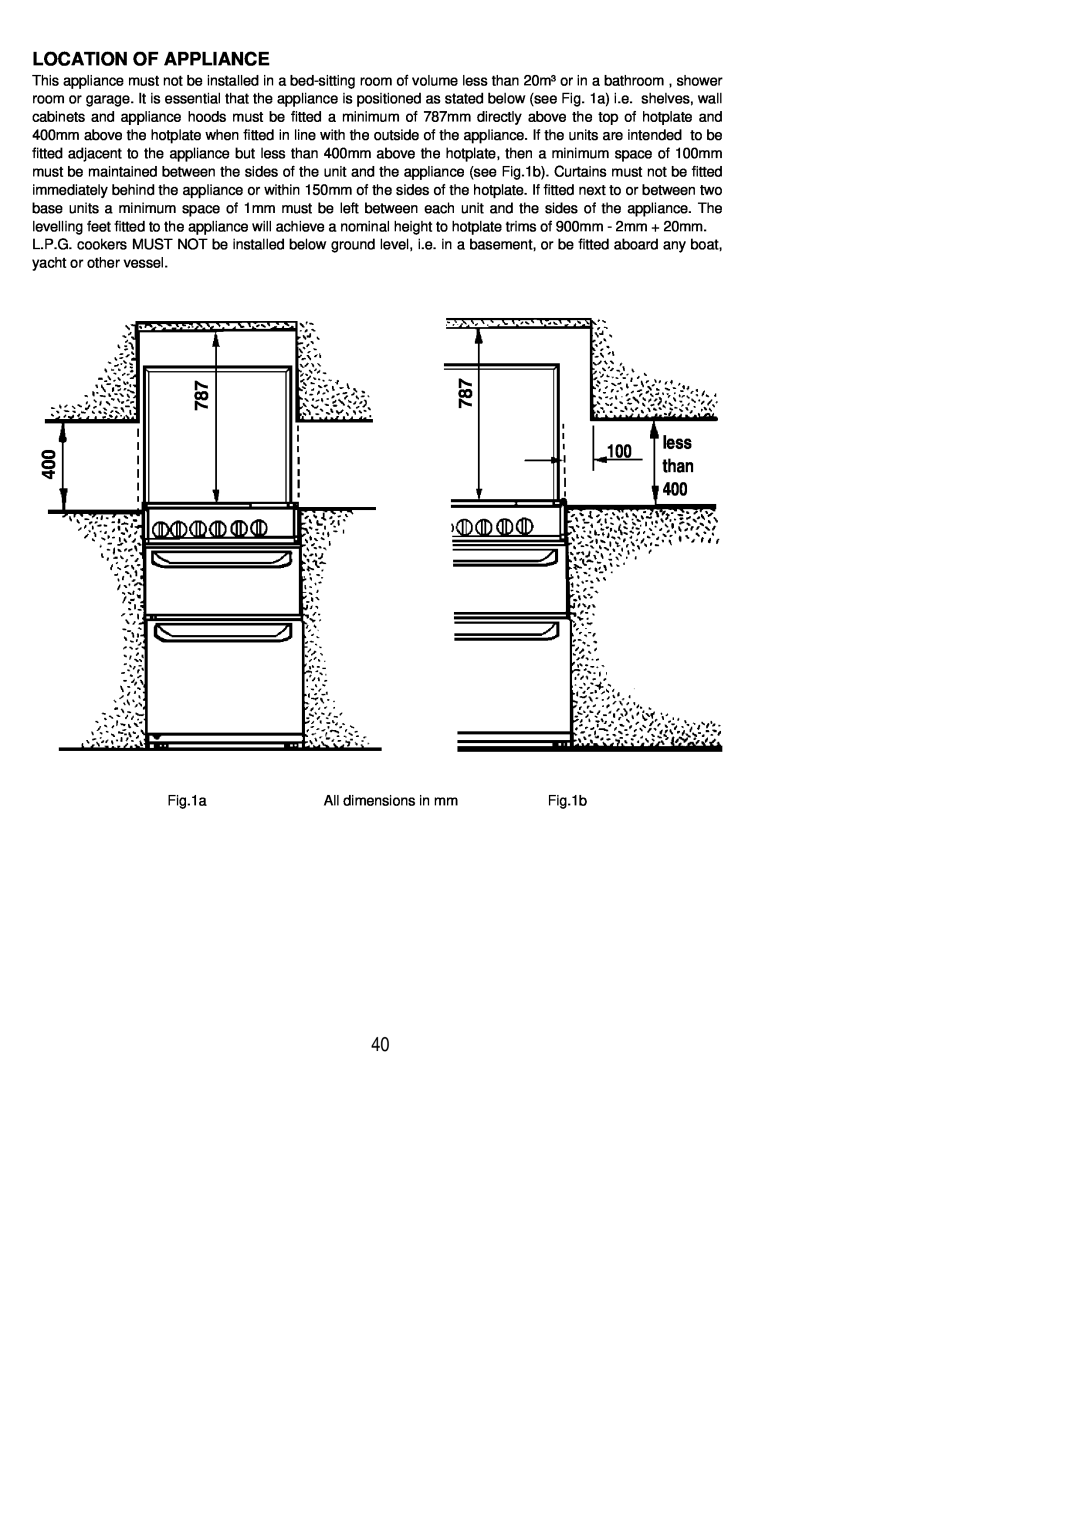 Electrolux SG 332 installation instructions Location Of Appliance, less than, All dimensions in mm, b 